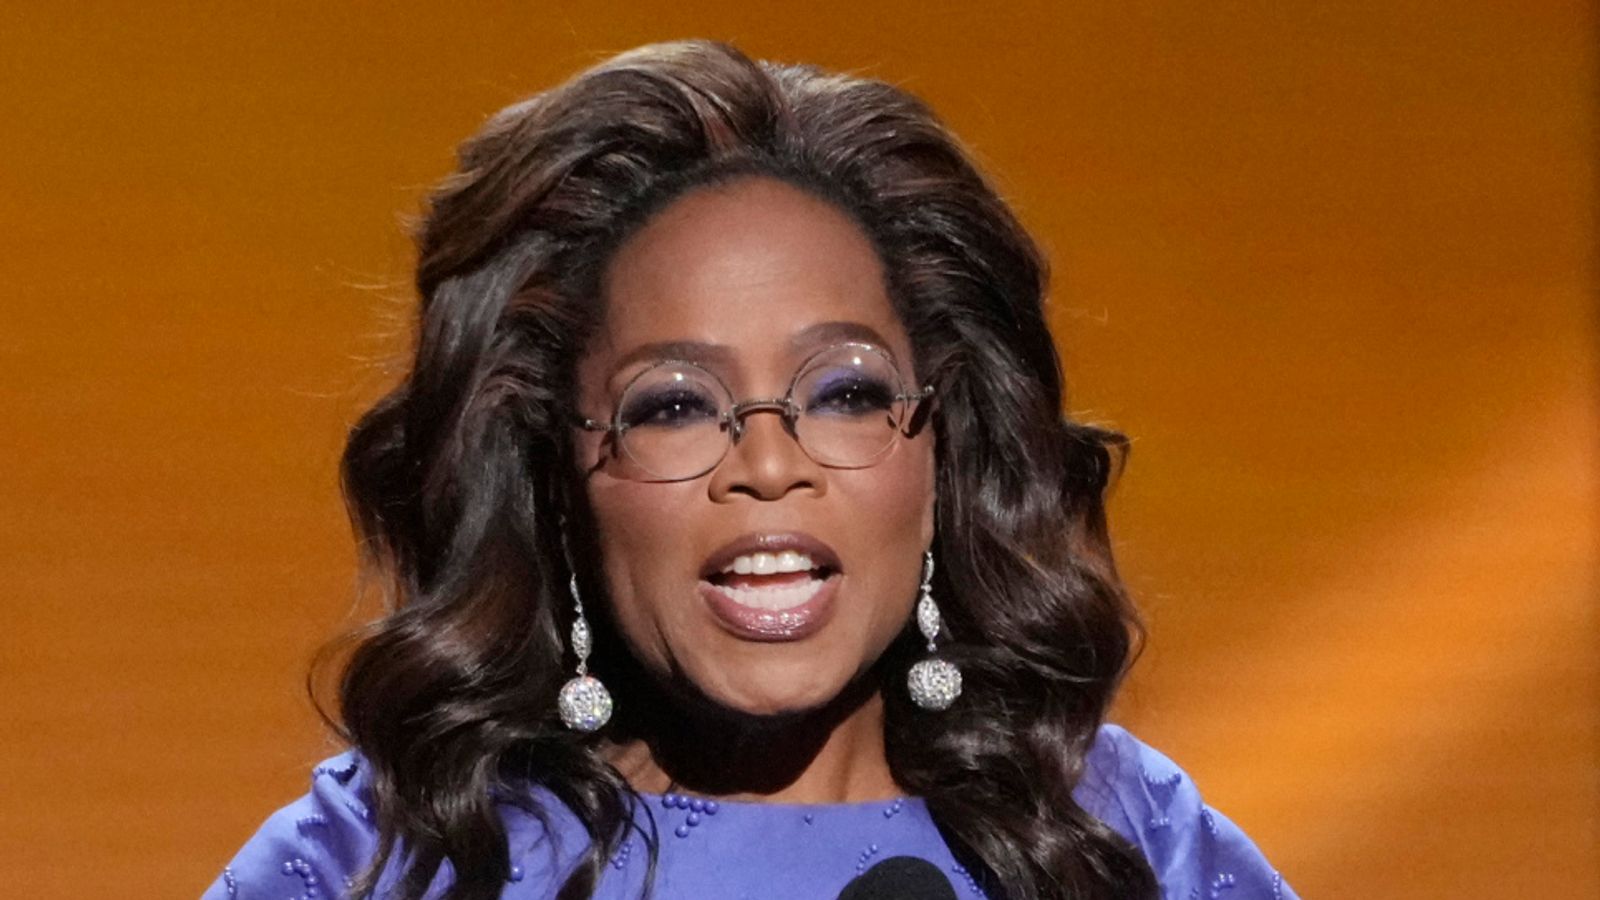 Oprah Winfrey speaks of ‘greatest remorse’ as she opens up about weight reduction struggles